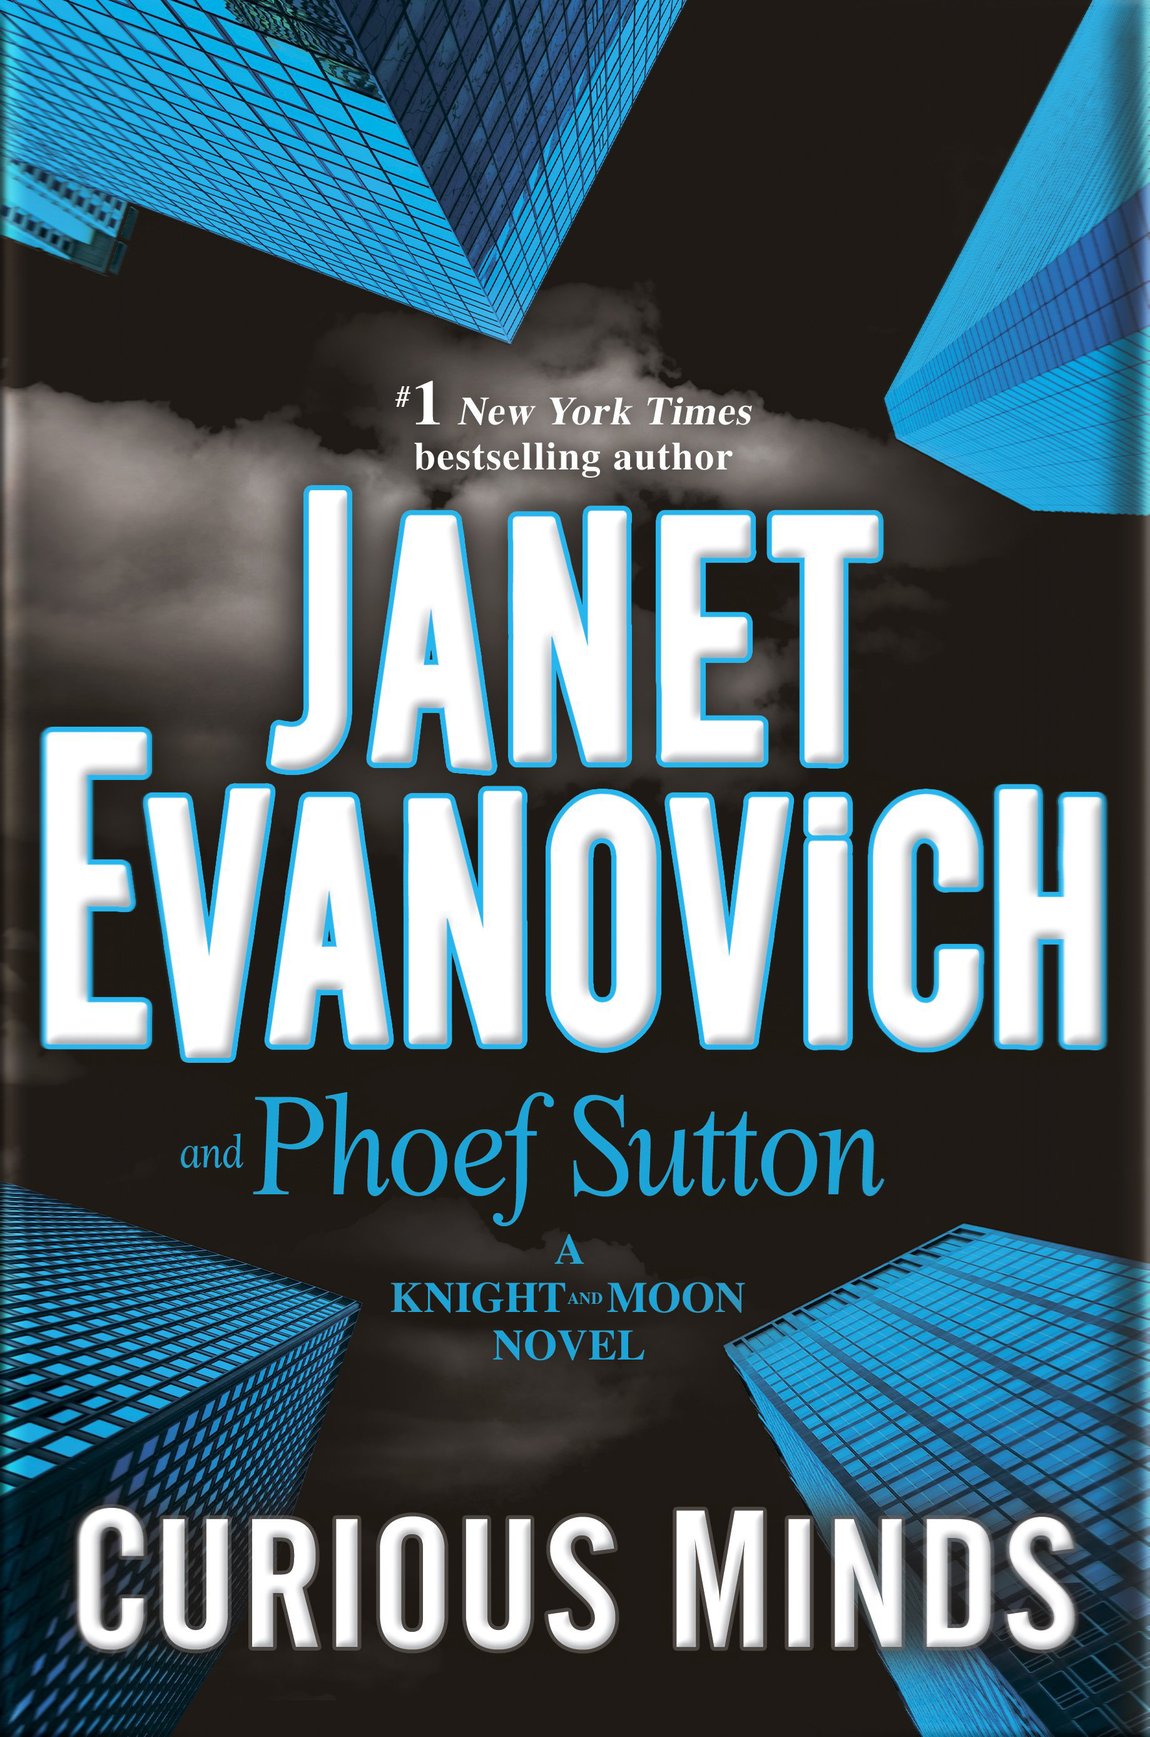 Curious Minds (2016) by Janet Evanovich